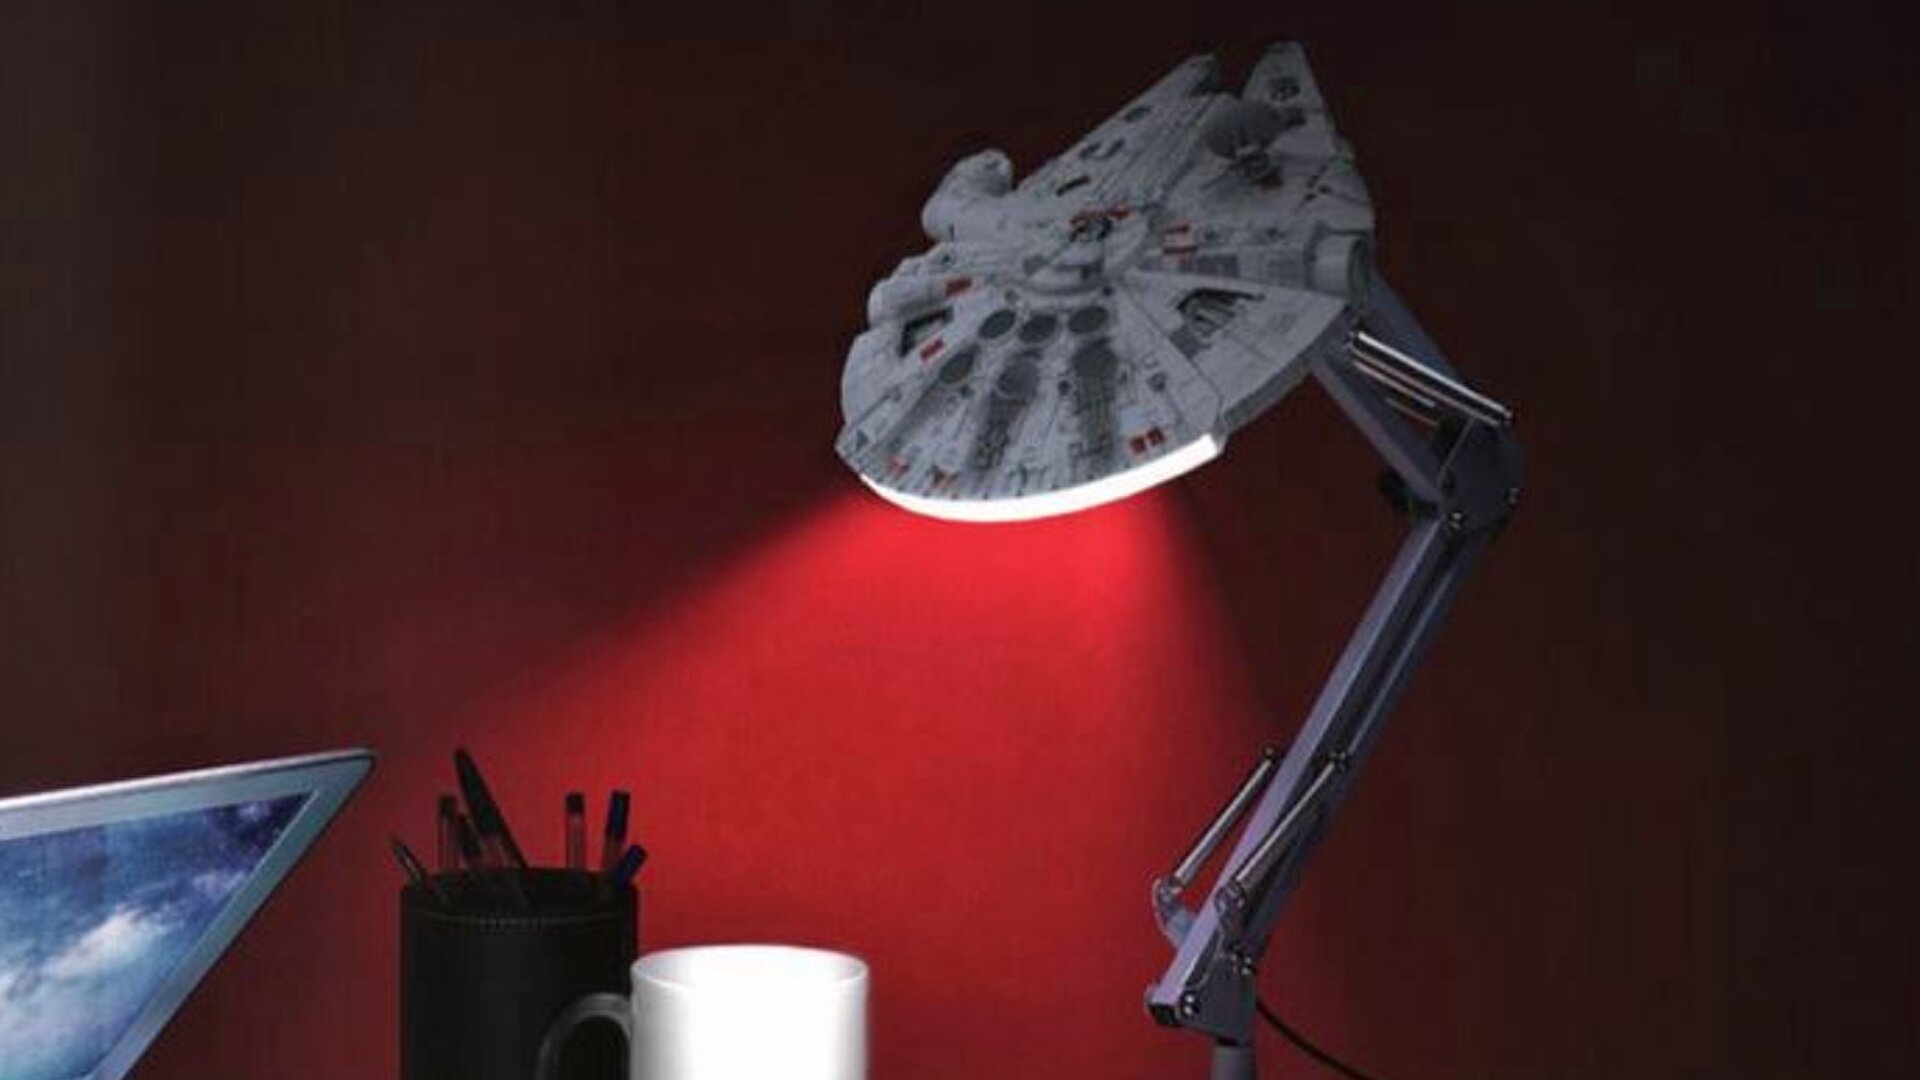 Cool Star Wars Falcon and Tie Fighter Desk Lamps to Help You on the Light Side — GeekTyrant